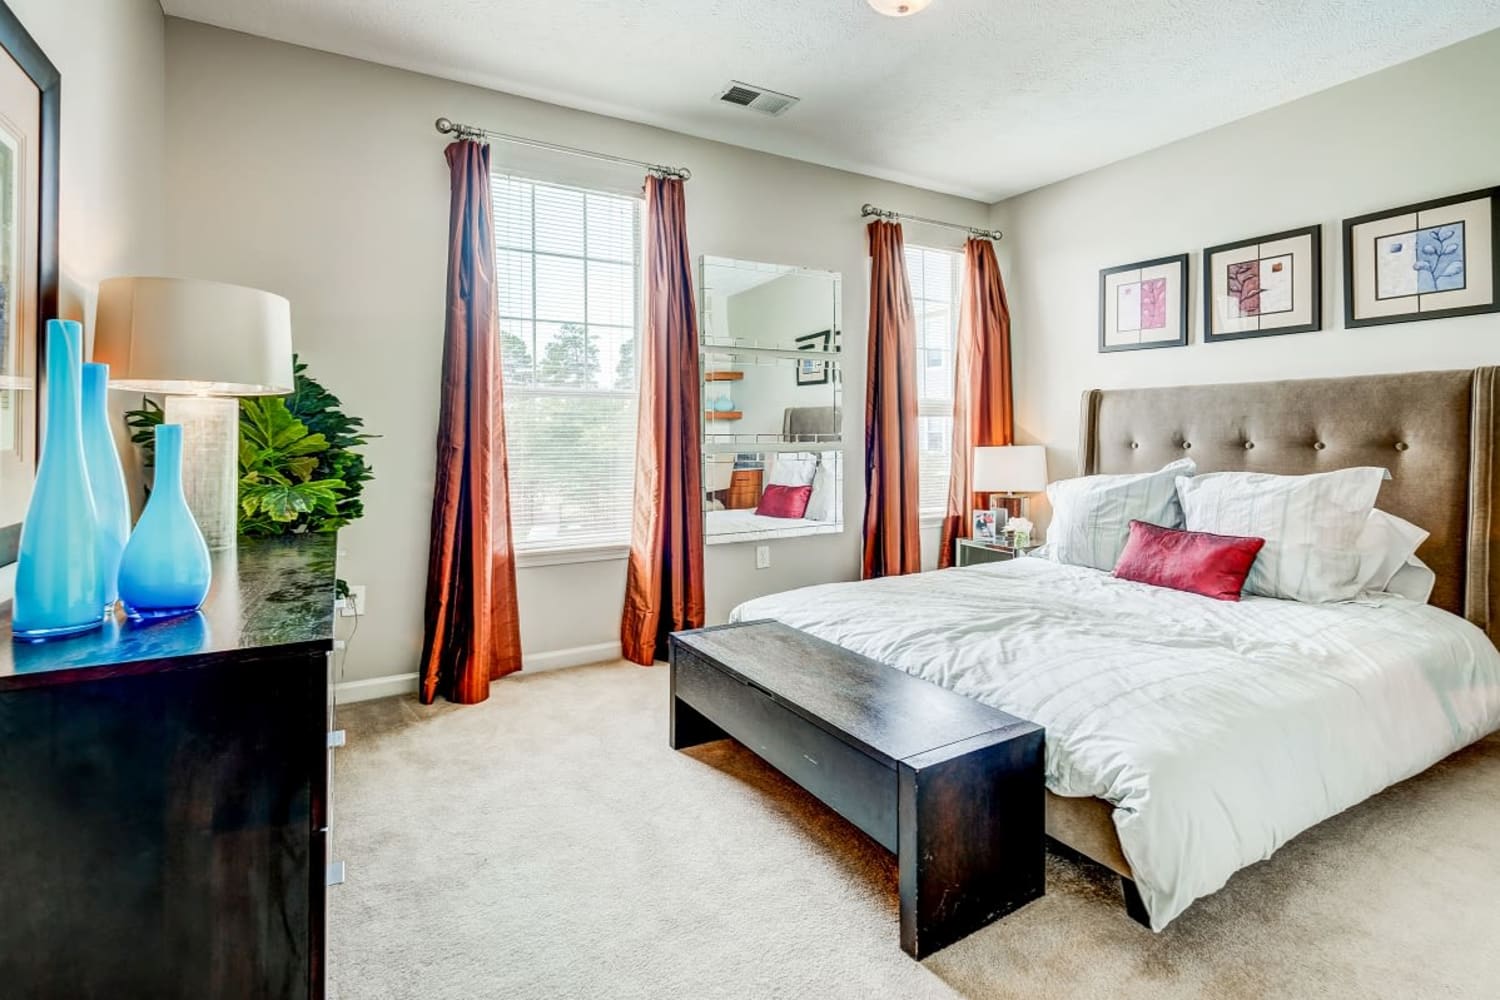 Luxurious and spacious bedroom with access to natural lighting at Westlake at Morganton in Fayetteville, North Carolina